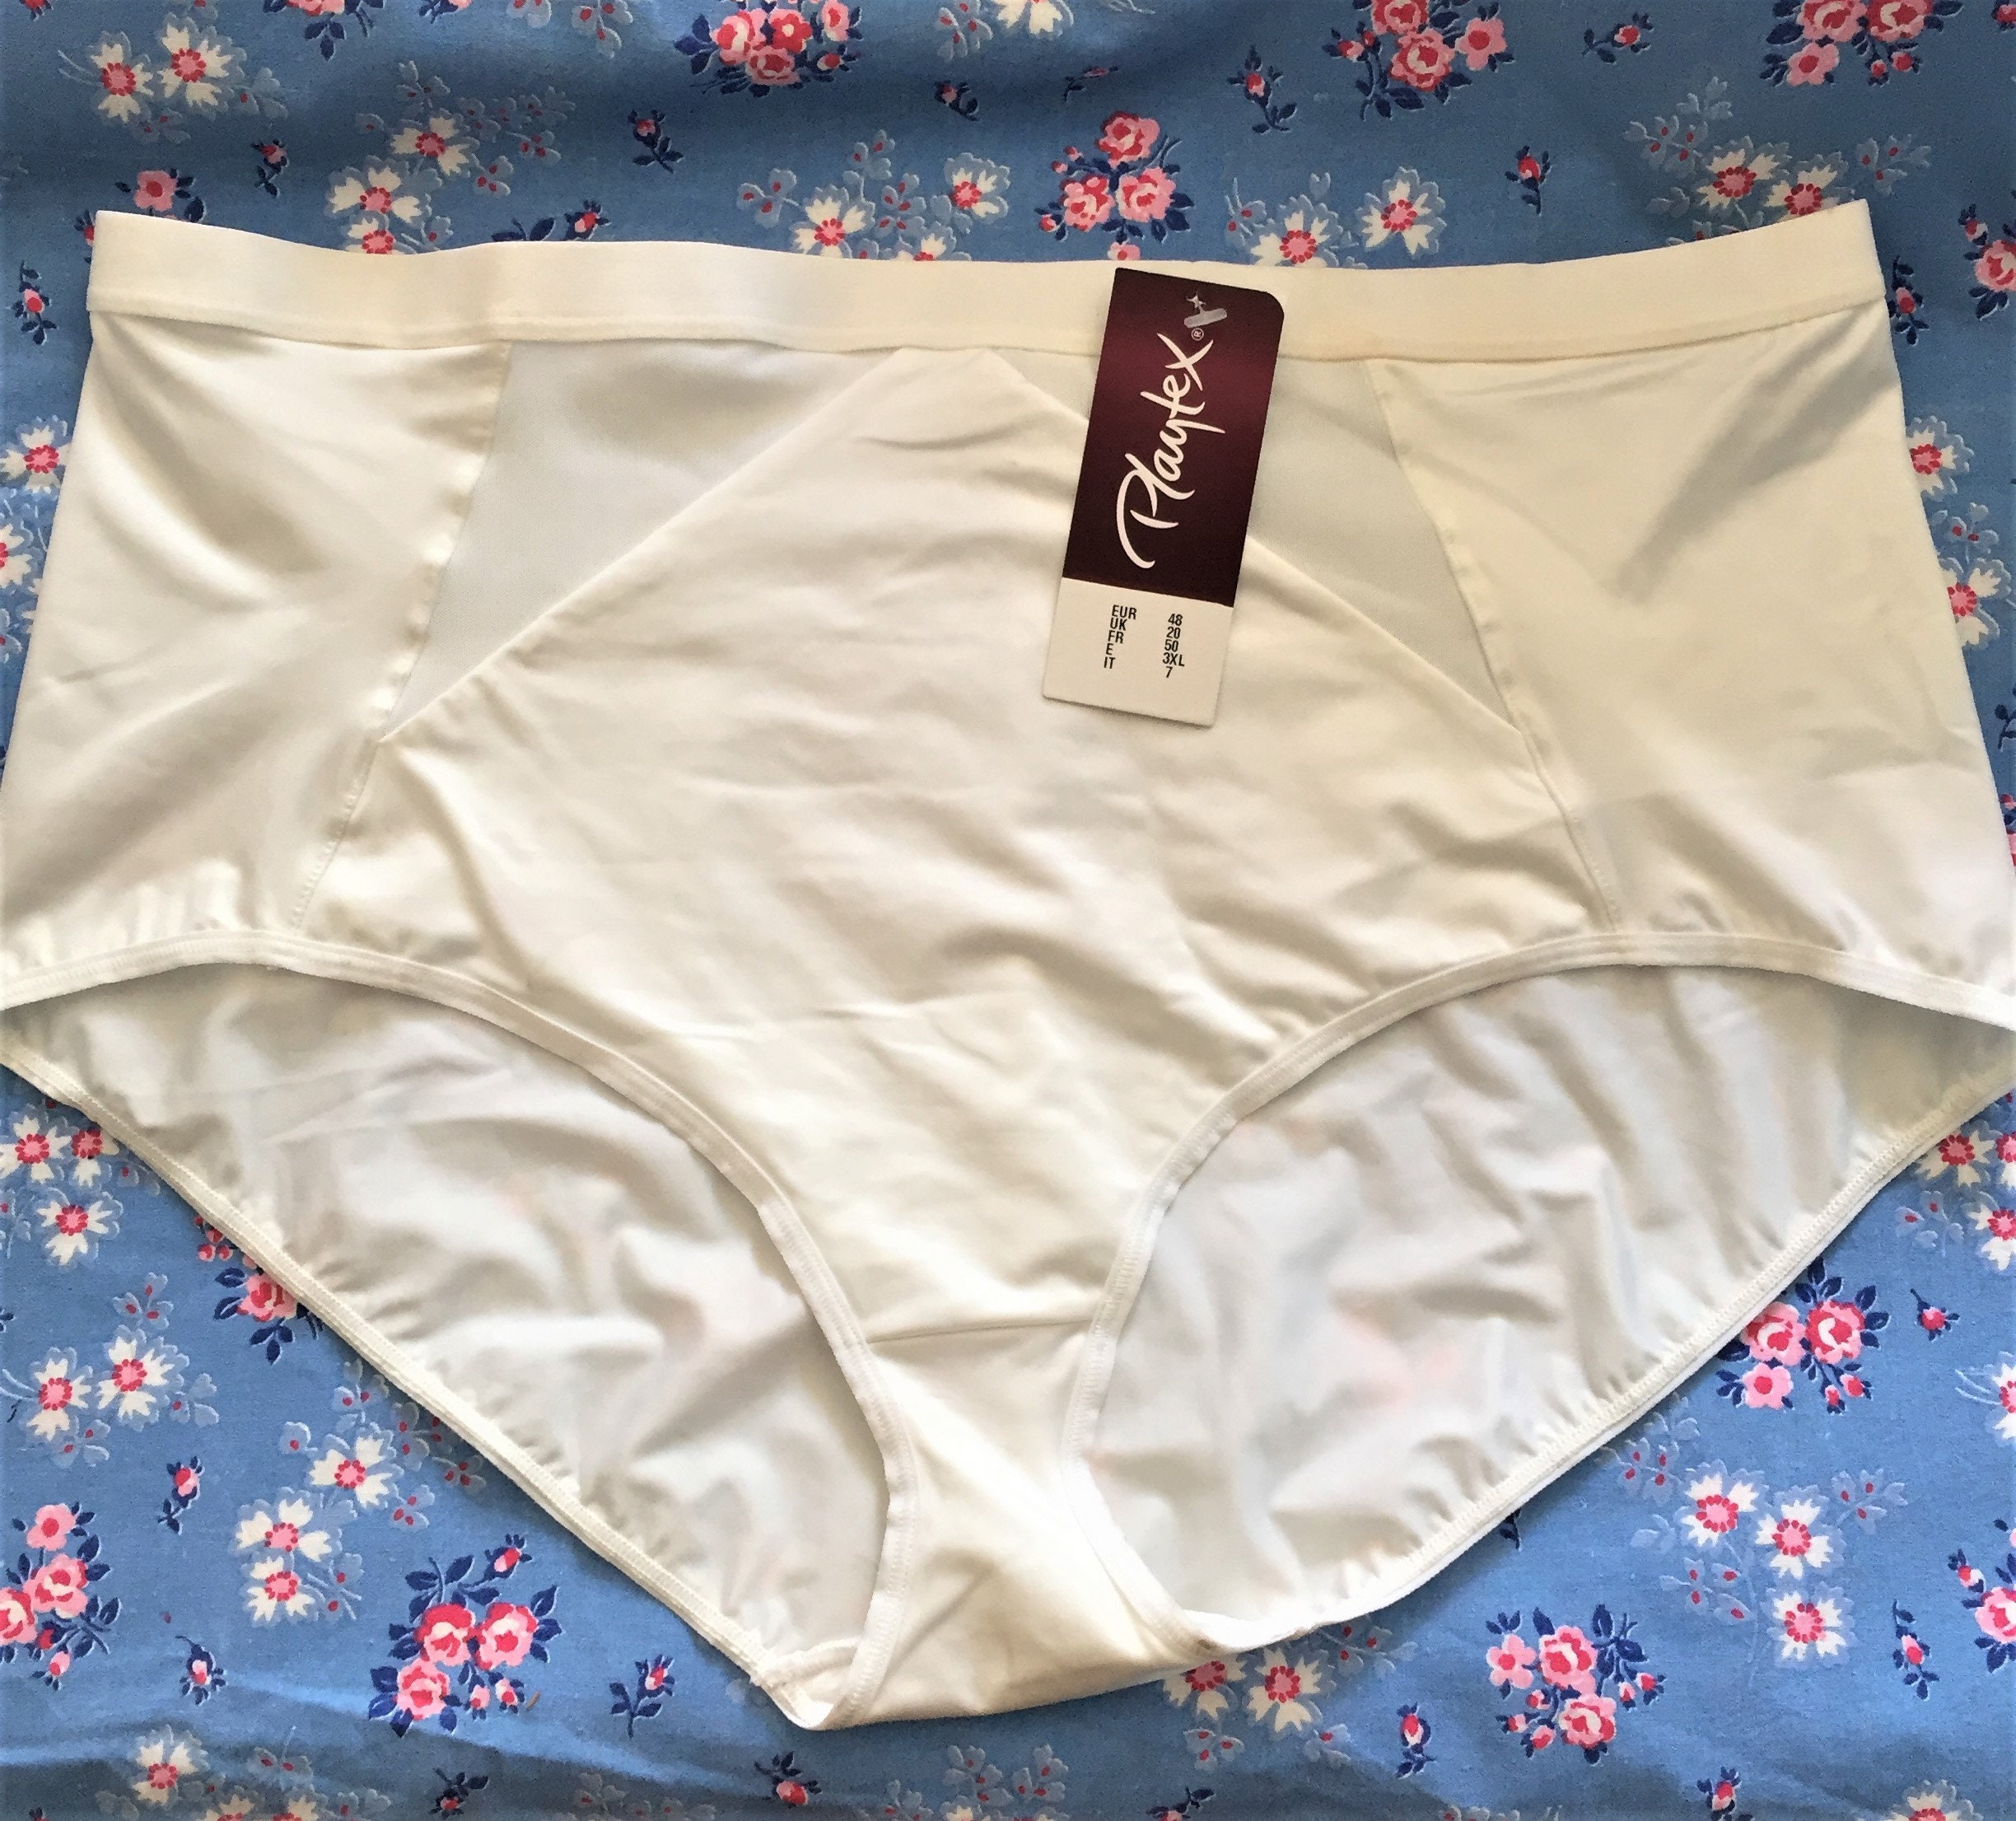 Vintage New Playtex Super Look Cotton Light Tummy and Body Shaping